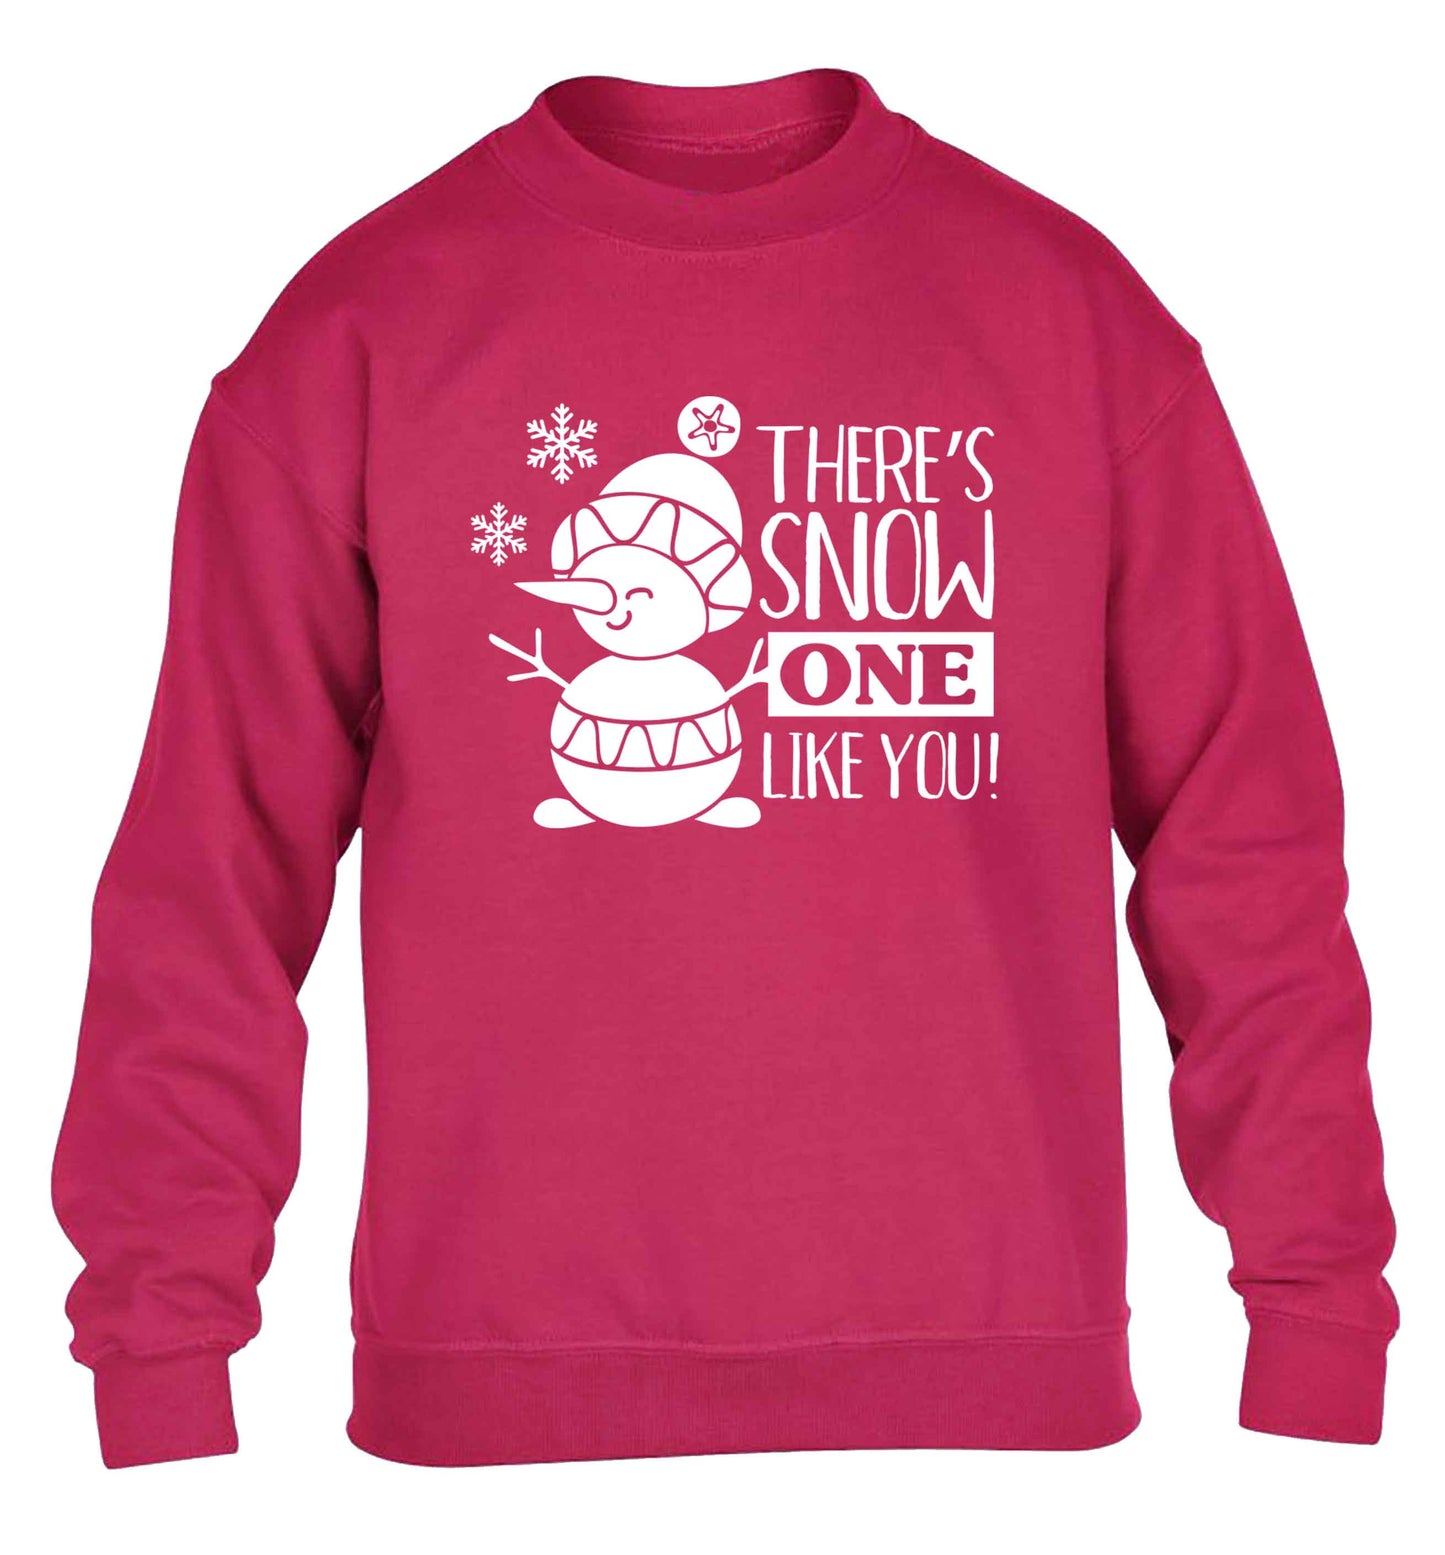 There's snow one like you children's pink sweater 12-13 Years